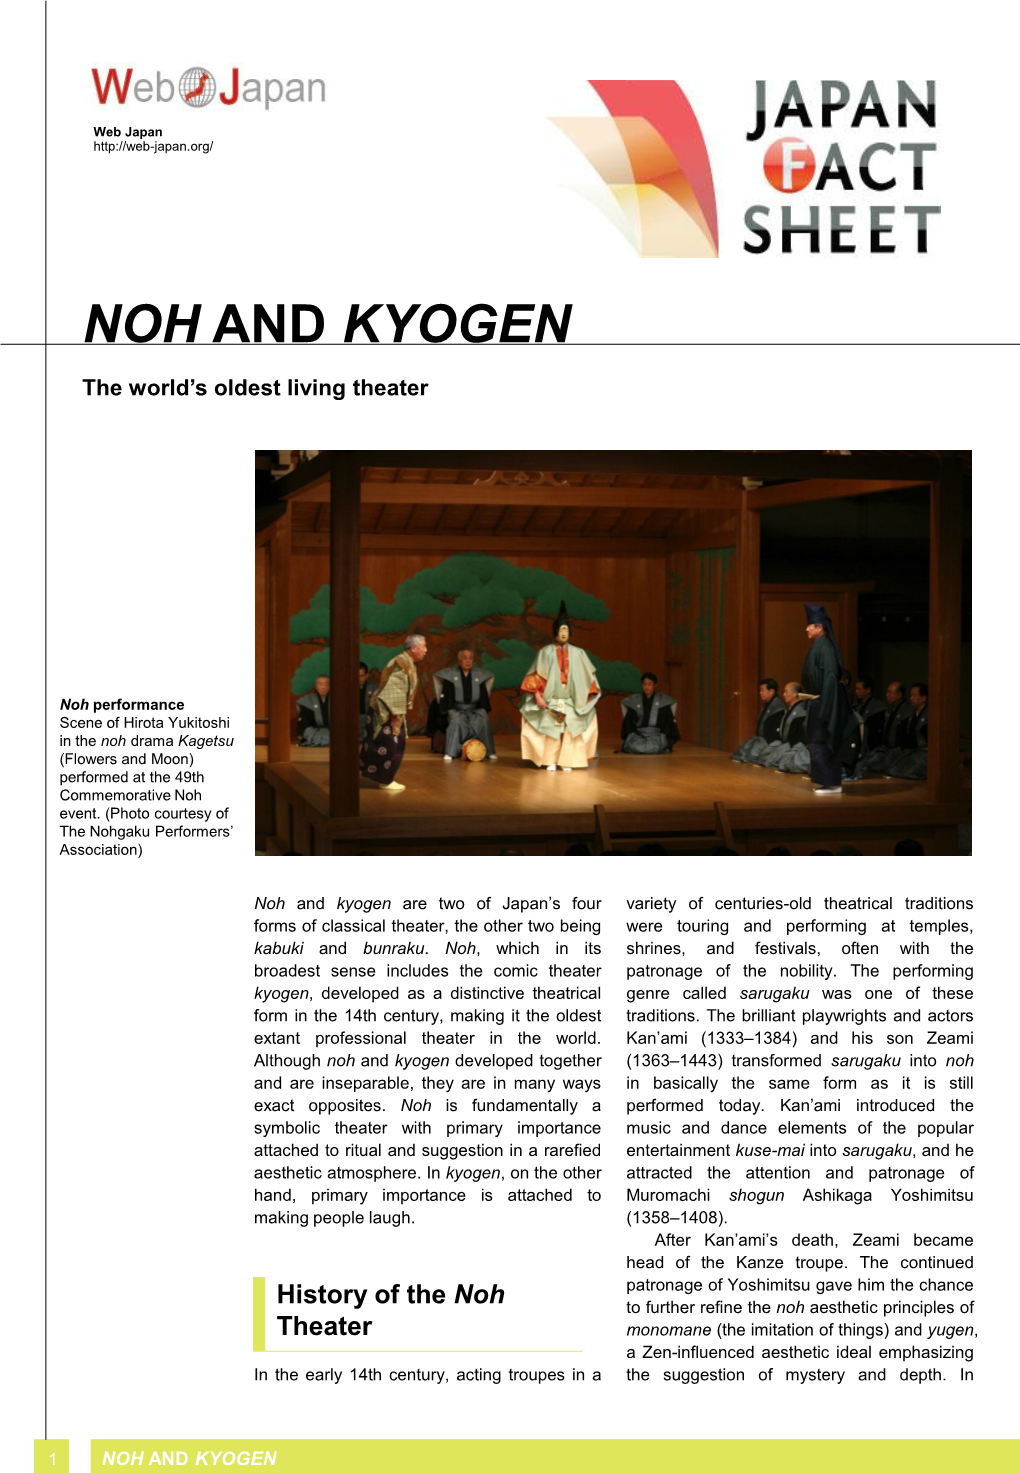 Noh and Kyogen